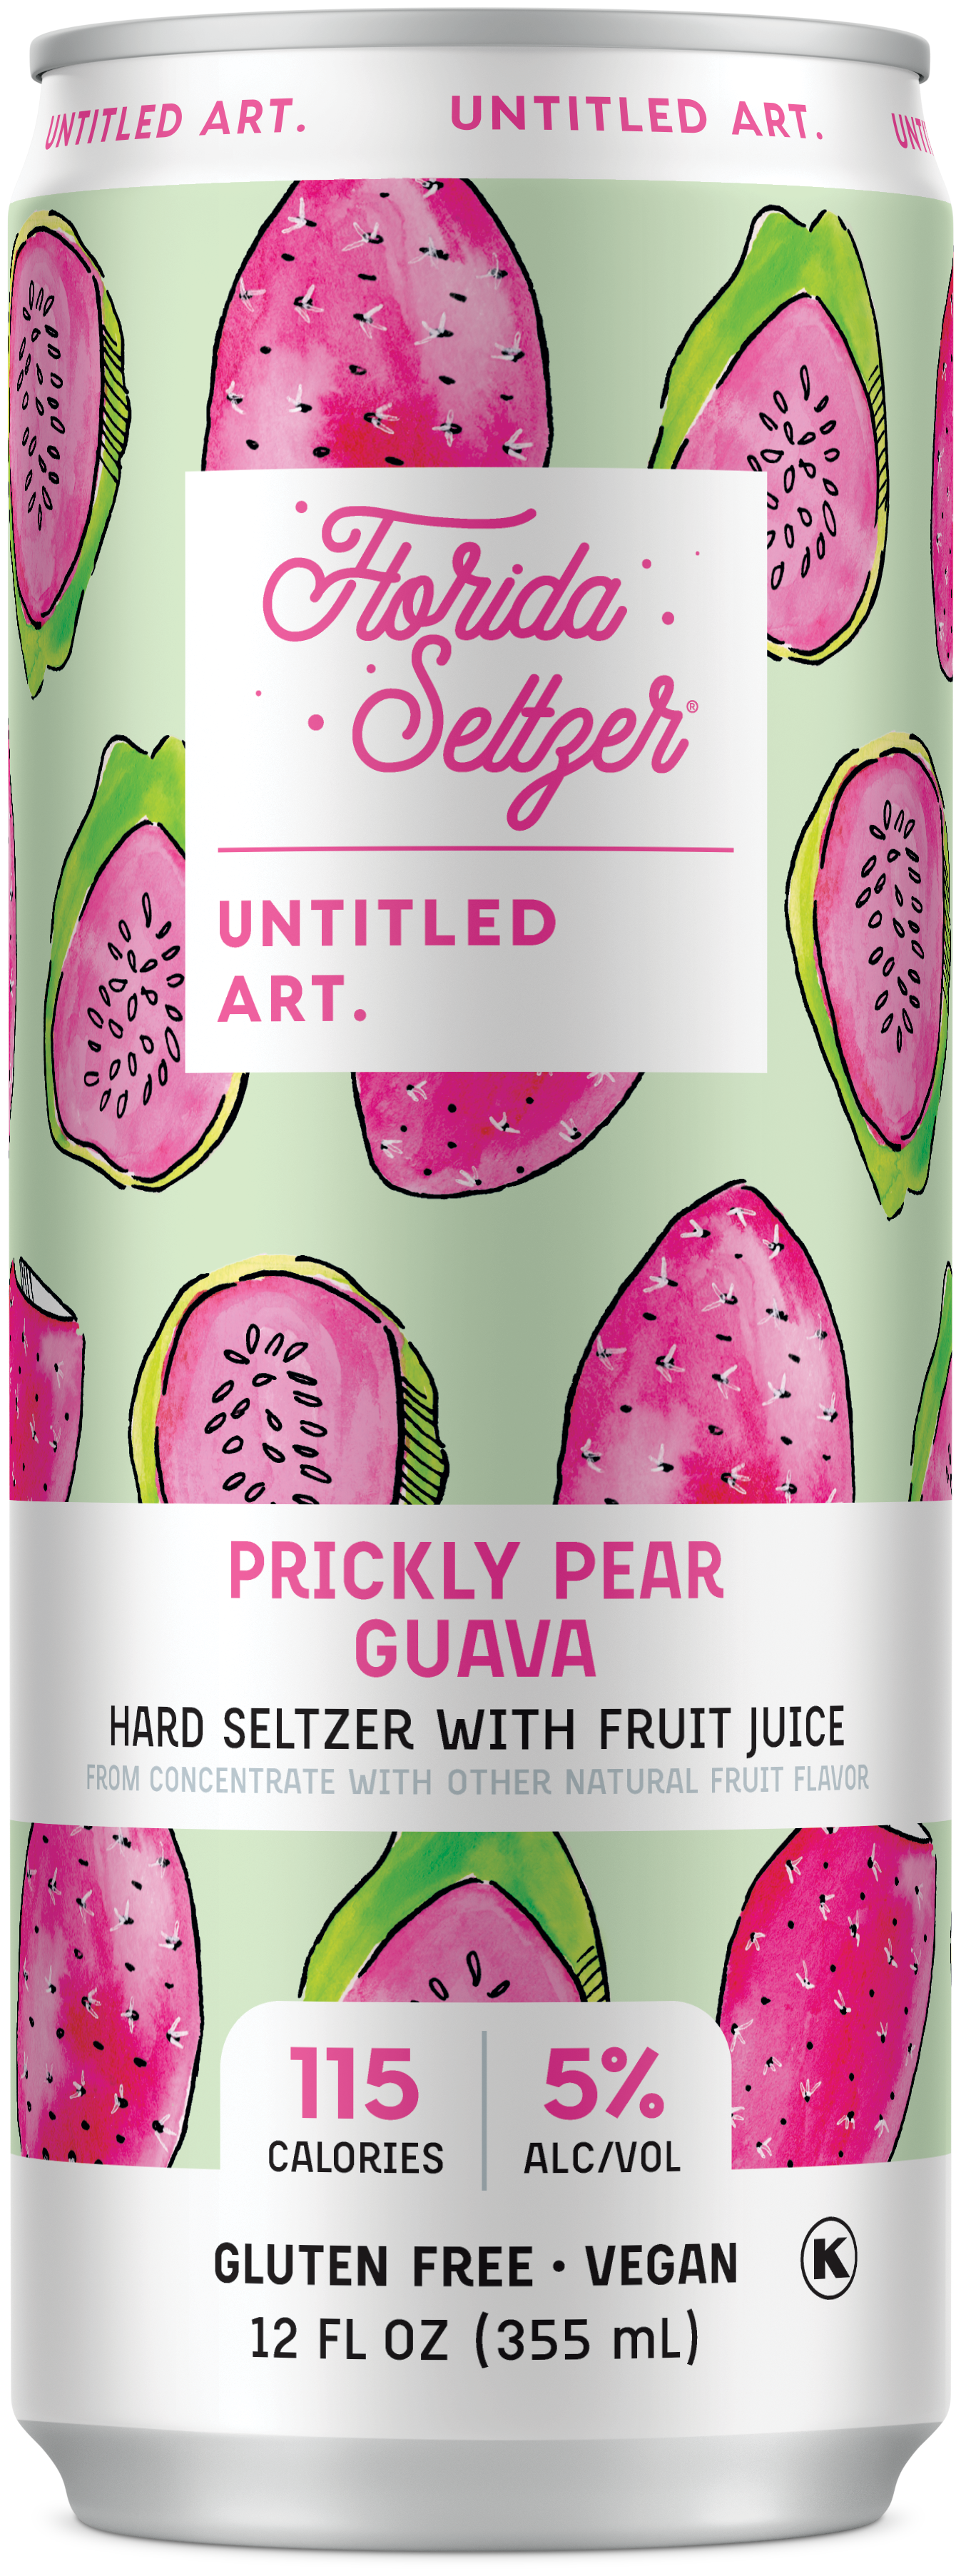 A can of florida sulfer's prickly pear juice.